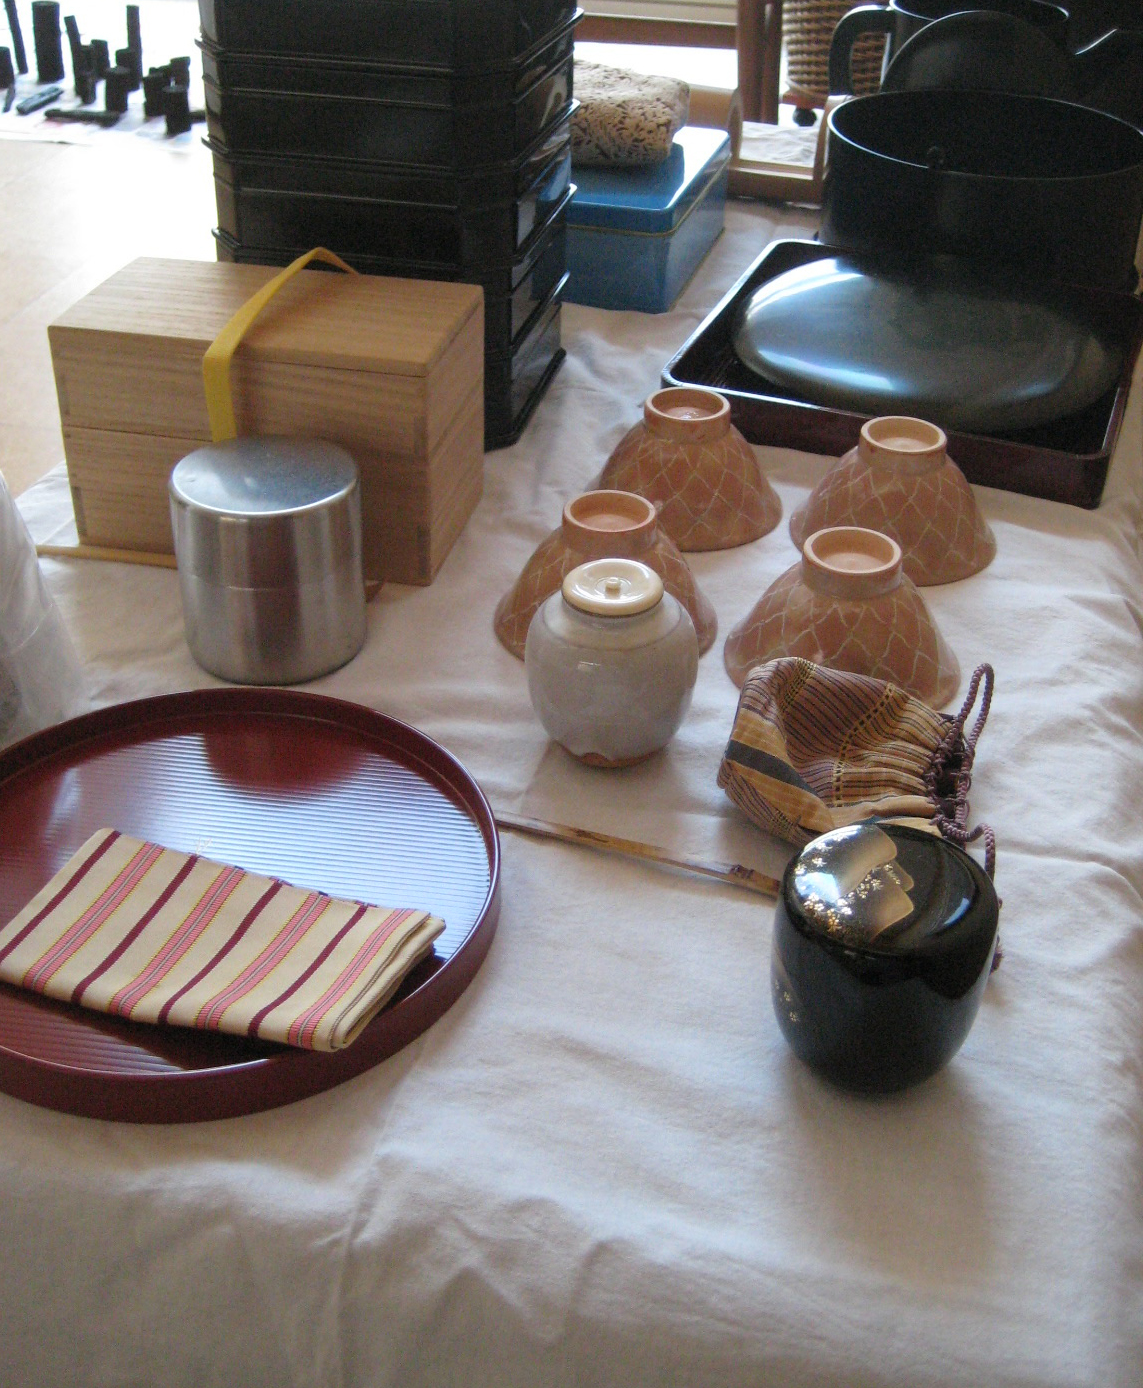 Preparing the sets of Kaiseki (meals for Chaji ) on a previous day